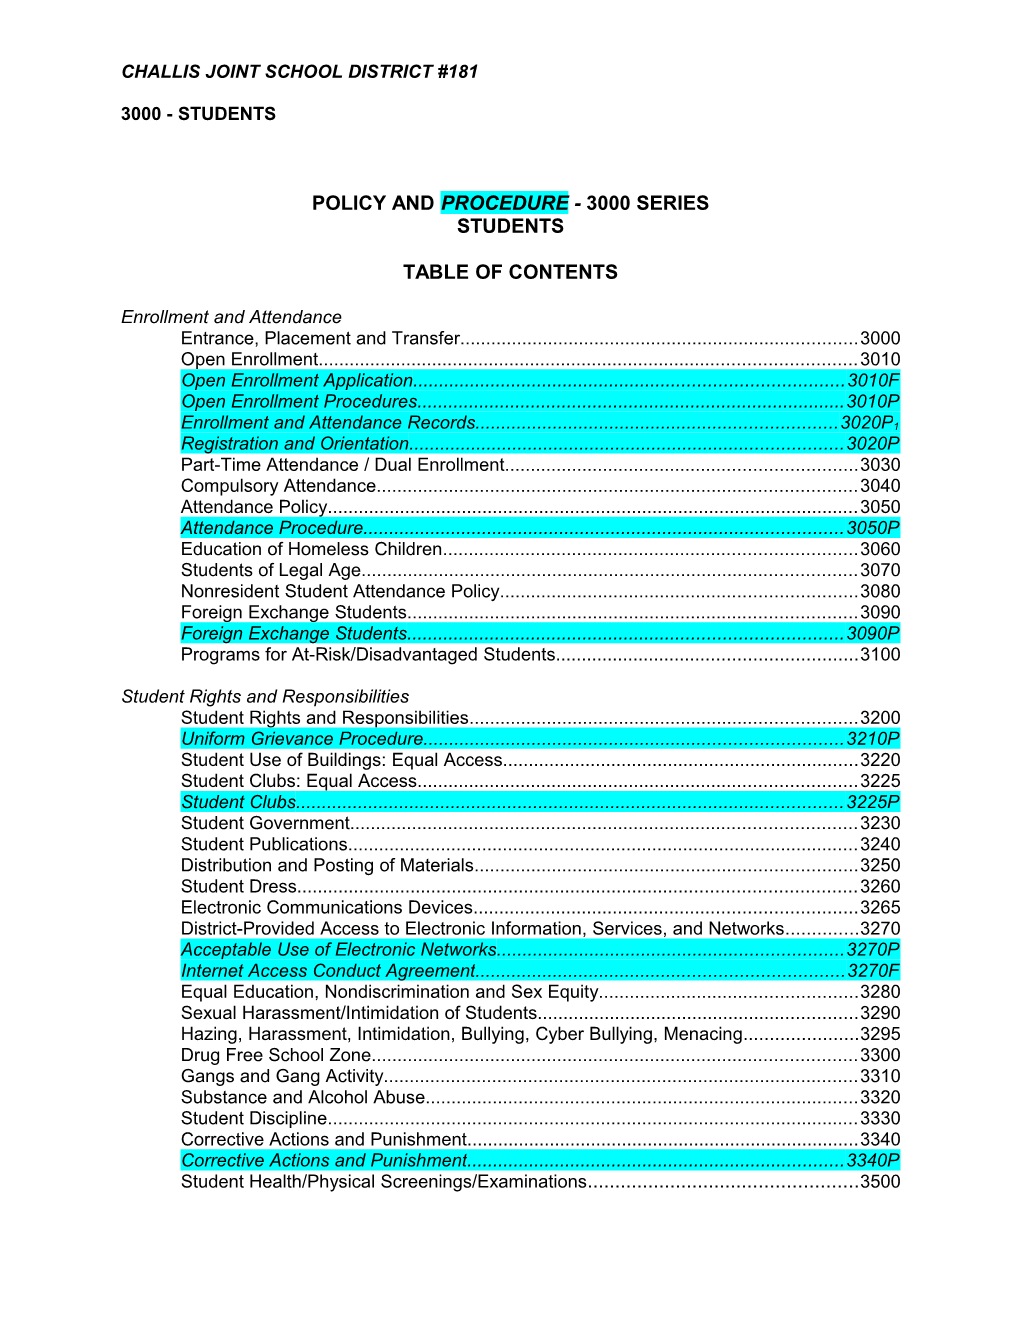 Policy and Procedure - 3000 Series